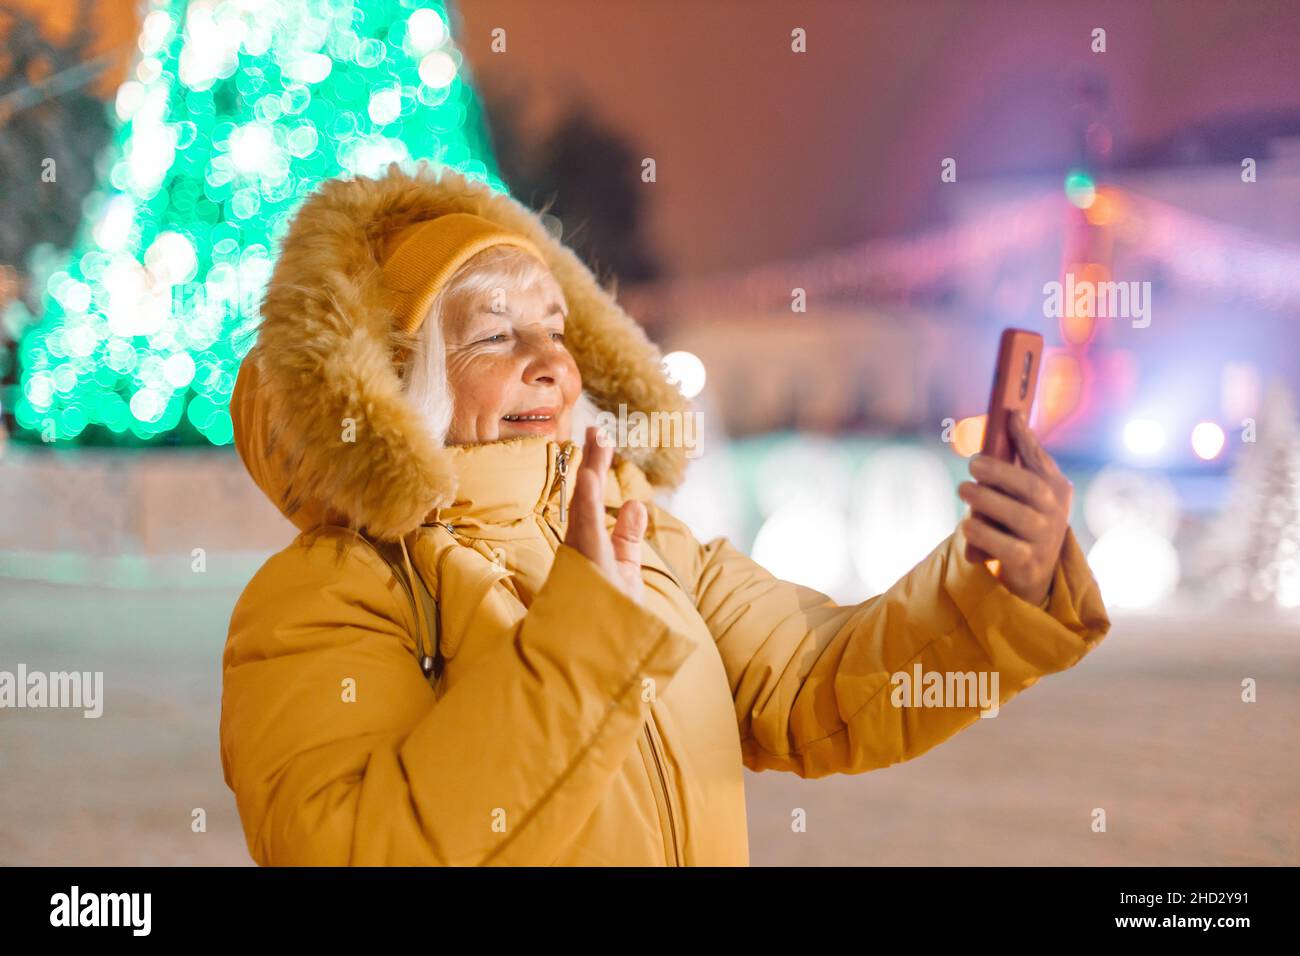 happy 50s blonde mature woman making selfie outdoors on street background decorated with Christmas lights at evening in winter during Christmas and Stock Photo